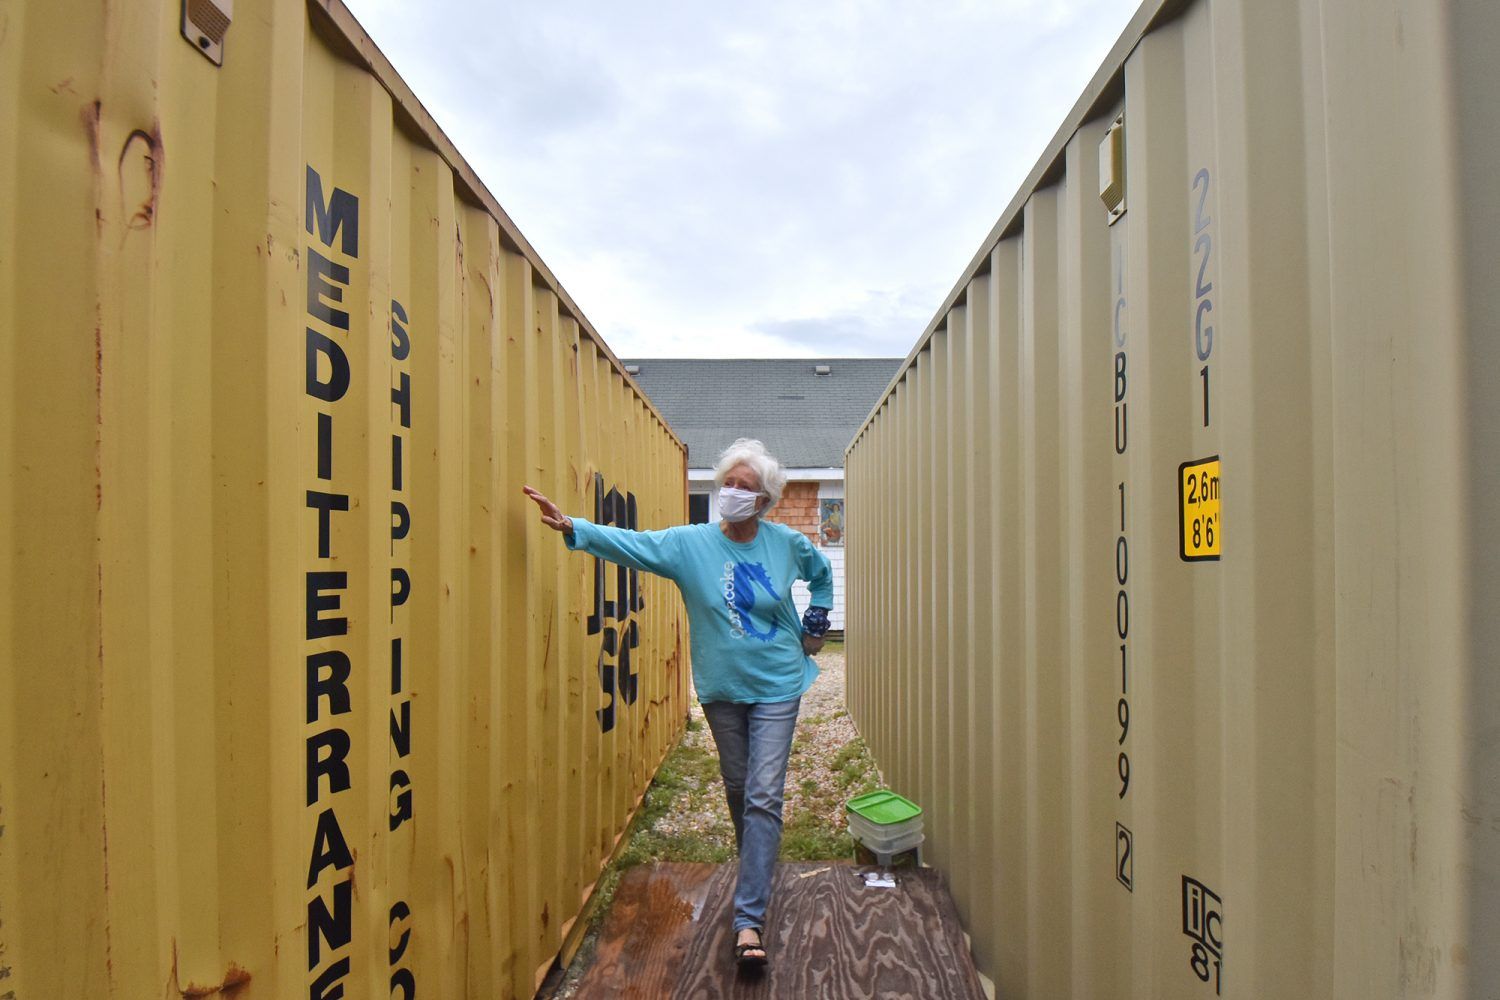 Mickey Baker, co-owner of Mermaid’s Folly, moves between two storage containers holding the contents of her shop on Ocracoke Island. Image by Dylan Ray. United States, undated.